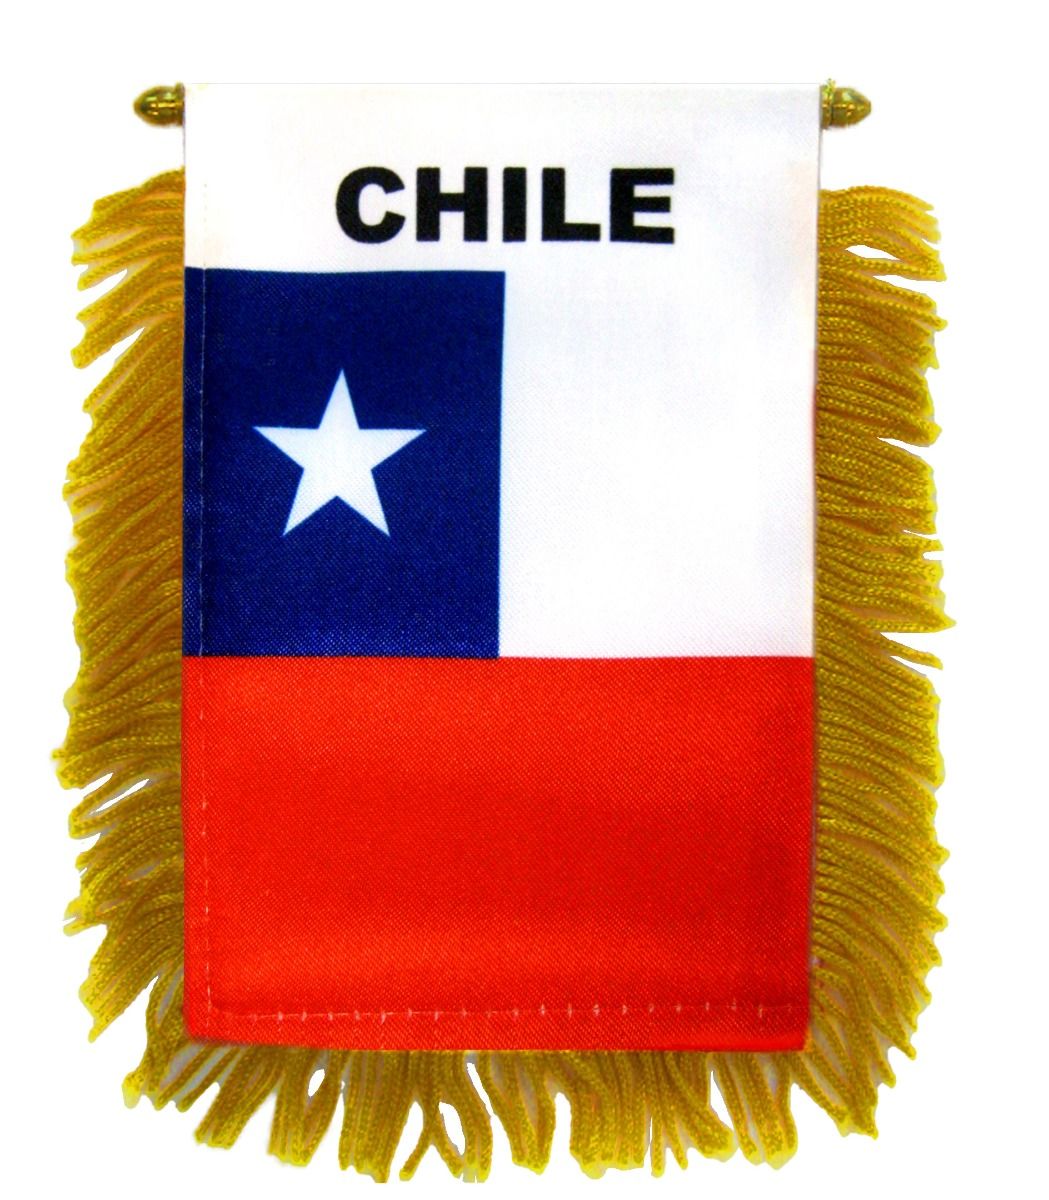 ZXvZYT Chile Chilean Flag Banner String,Small Mini Chile Pennant flags,For Grand Opening,Olympics,National Sports Events,Party Festival Decorations 50 Feet 38 Flags 